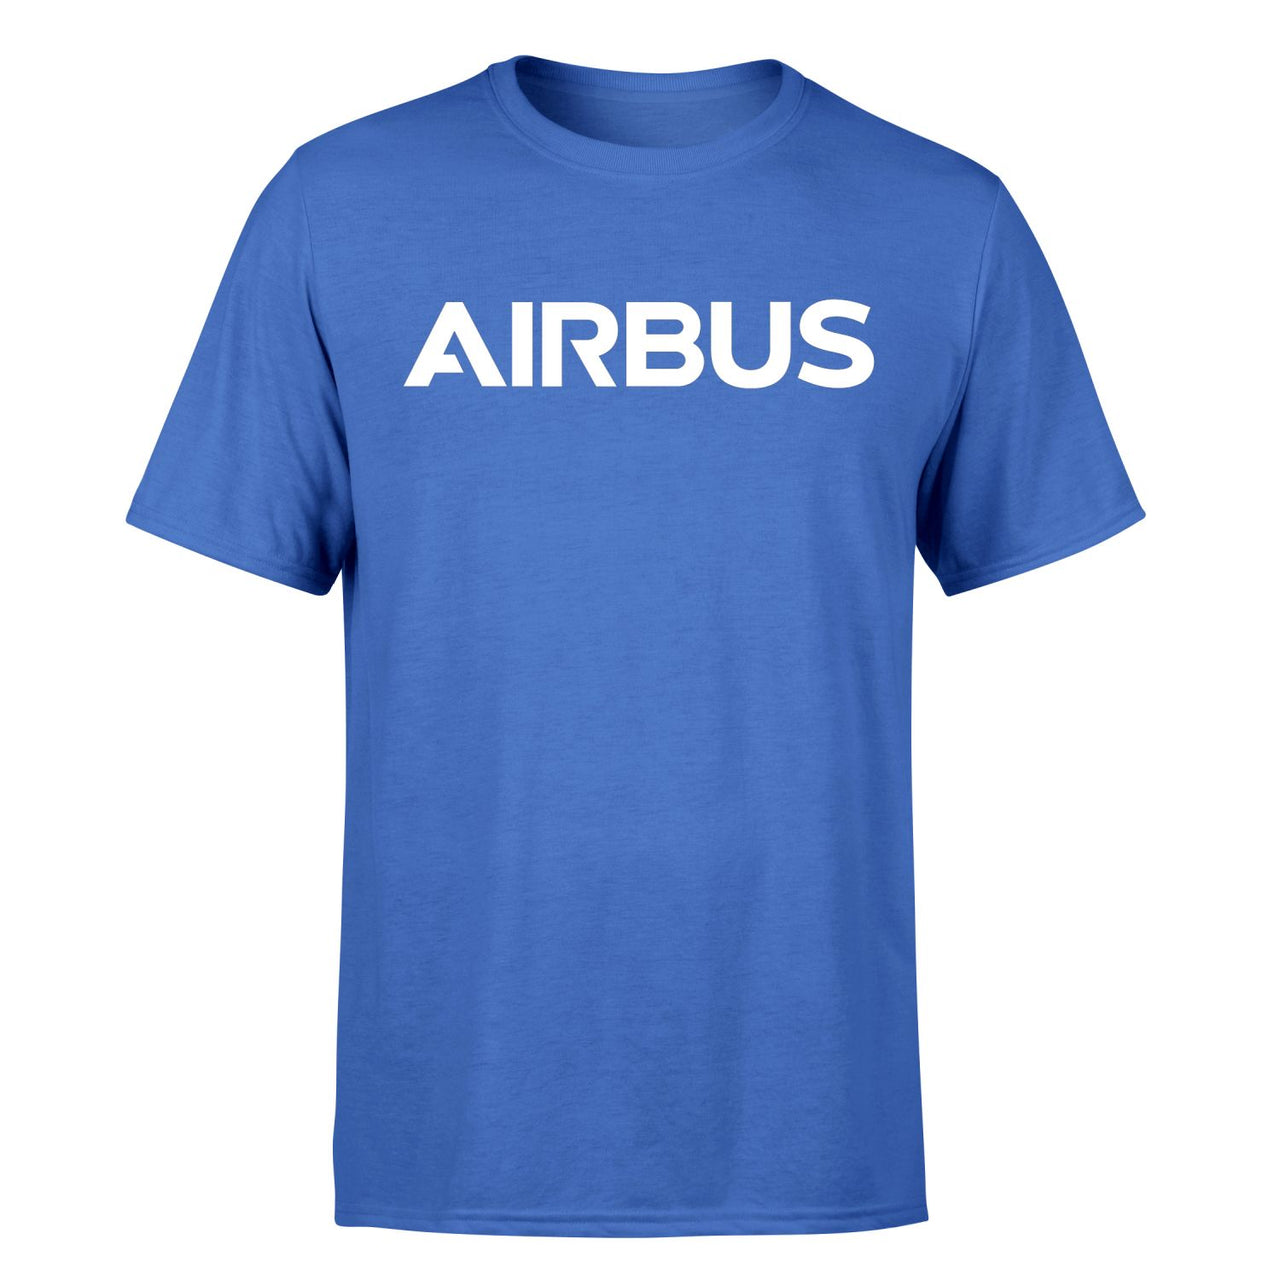 Airbus & Text Designed T-Shirts